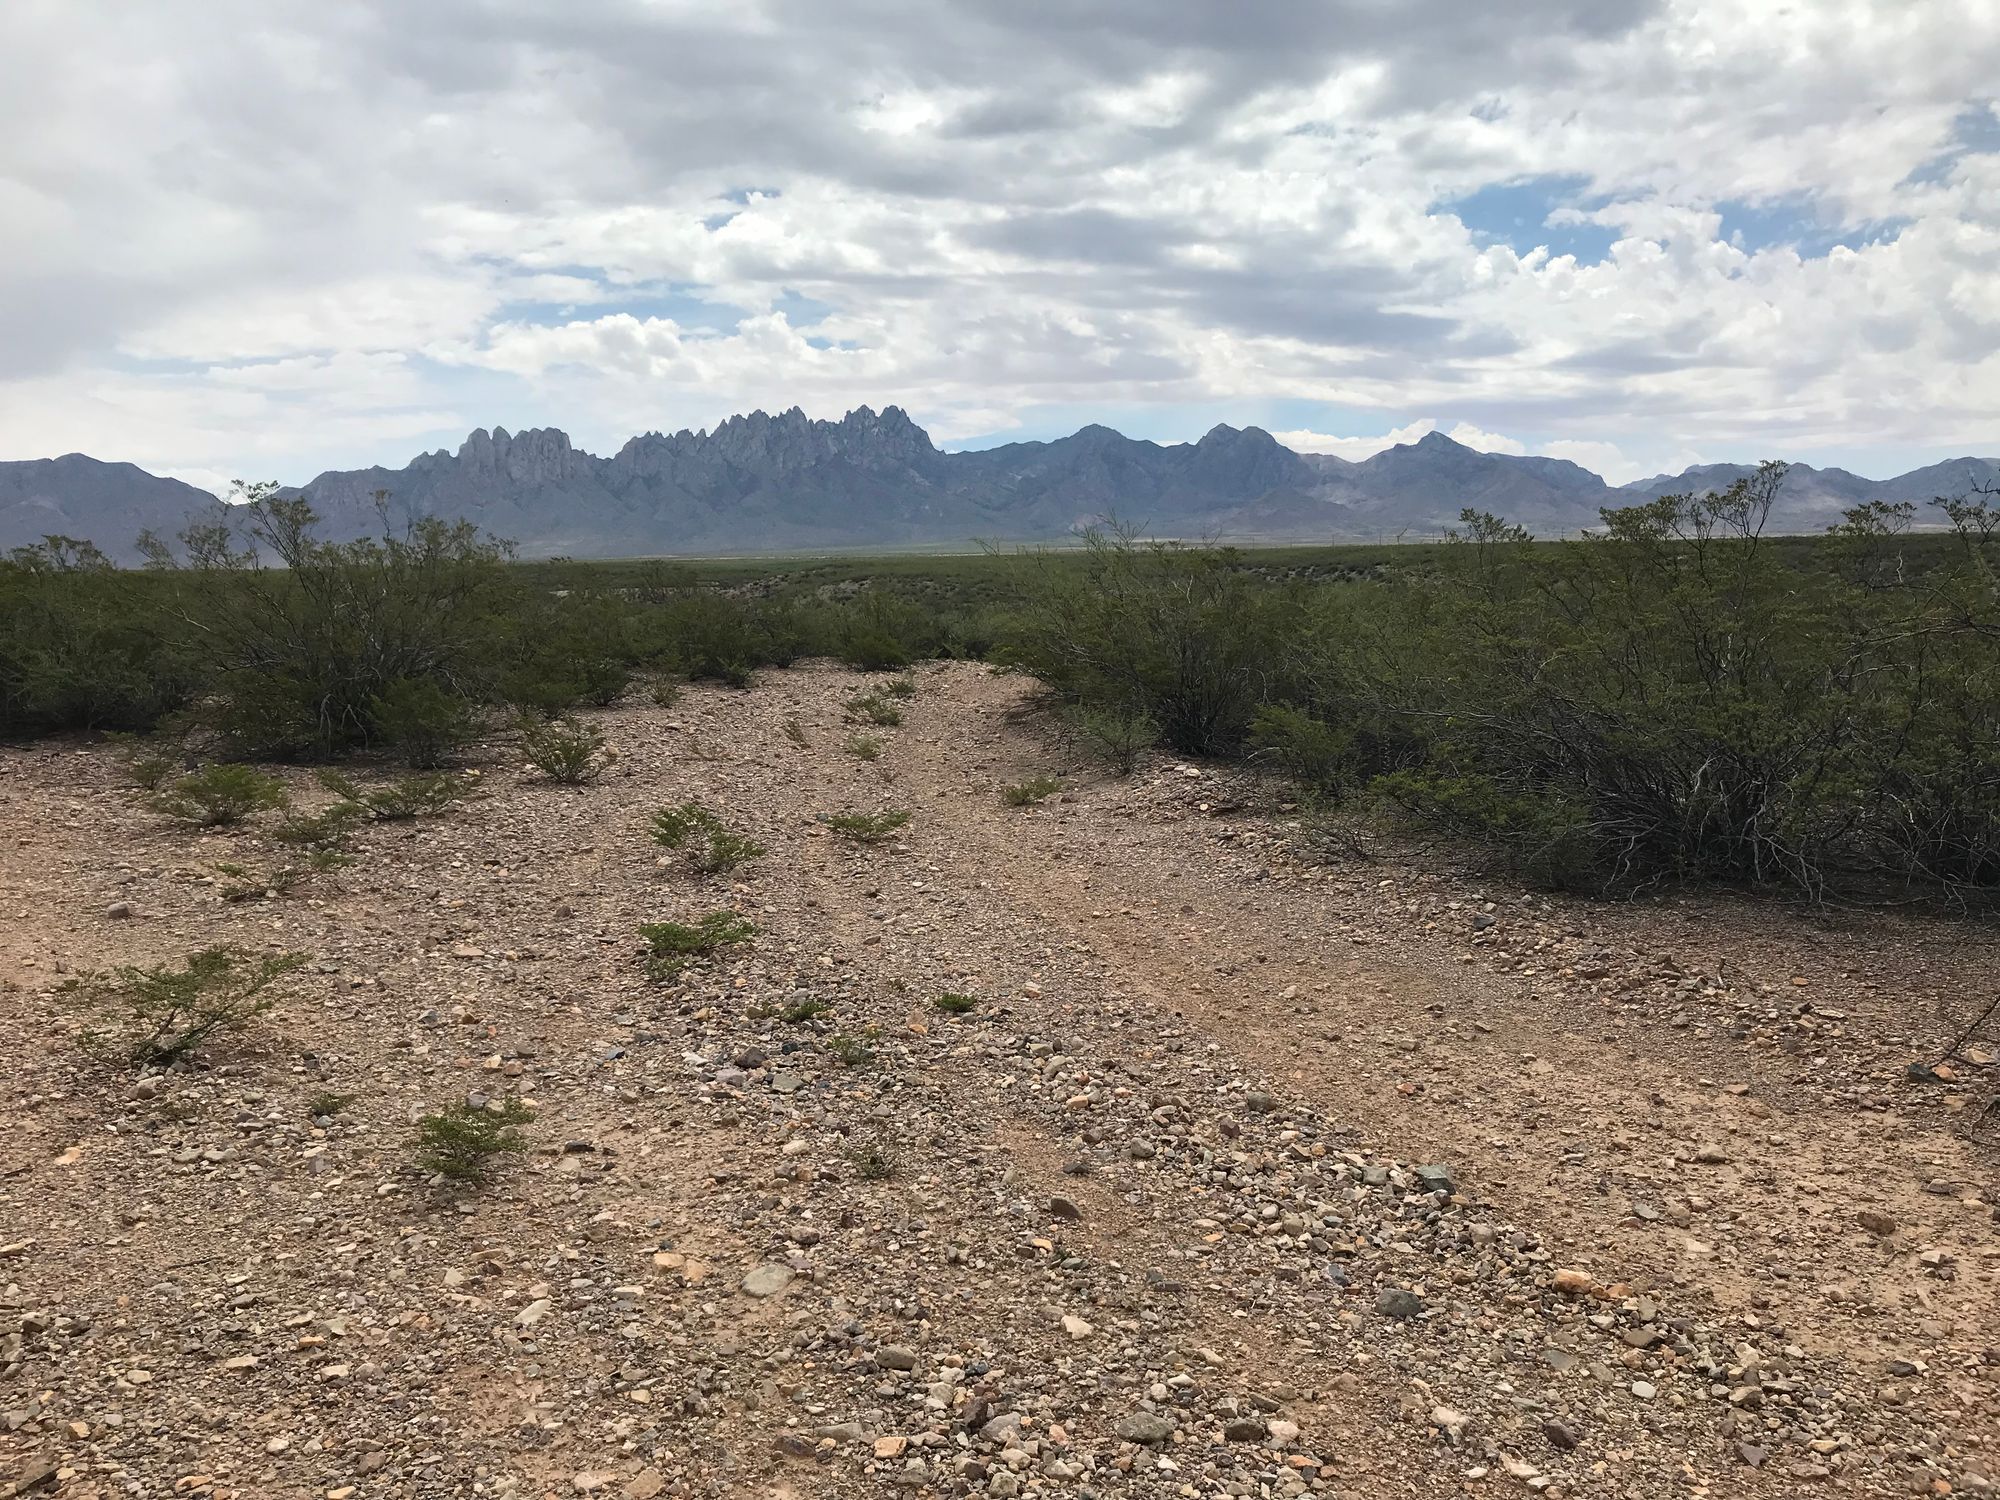 Photo of the Organ Mountains, Las Cruces, NM